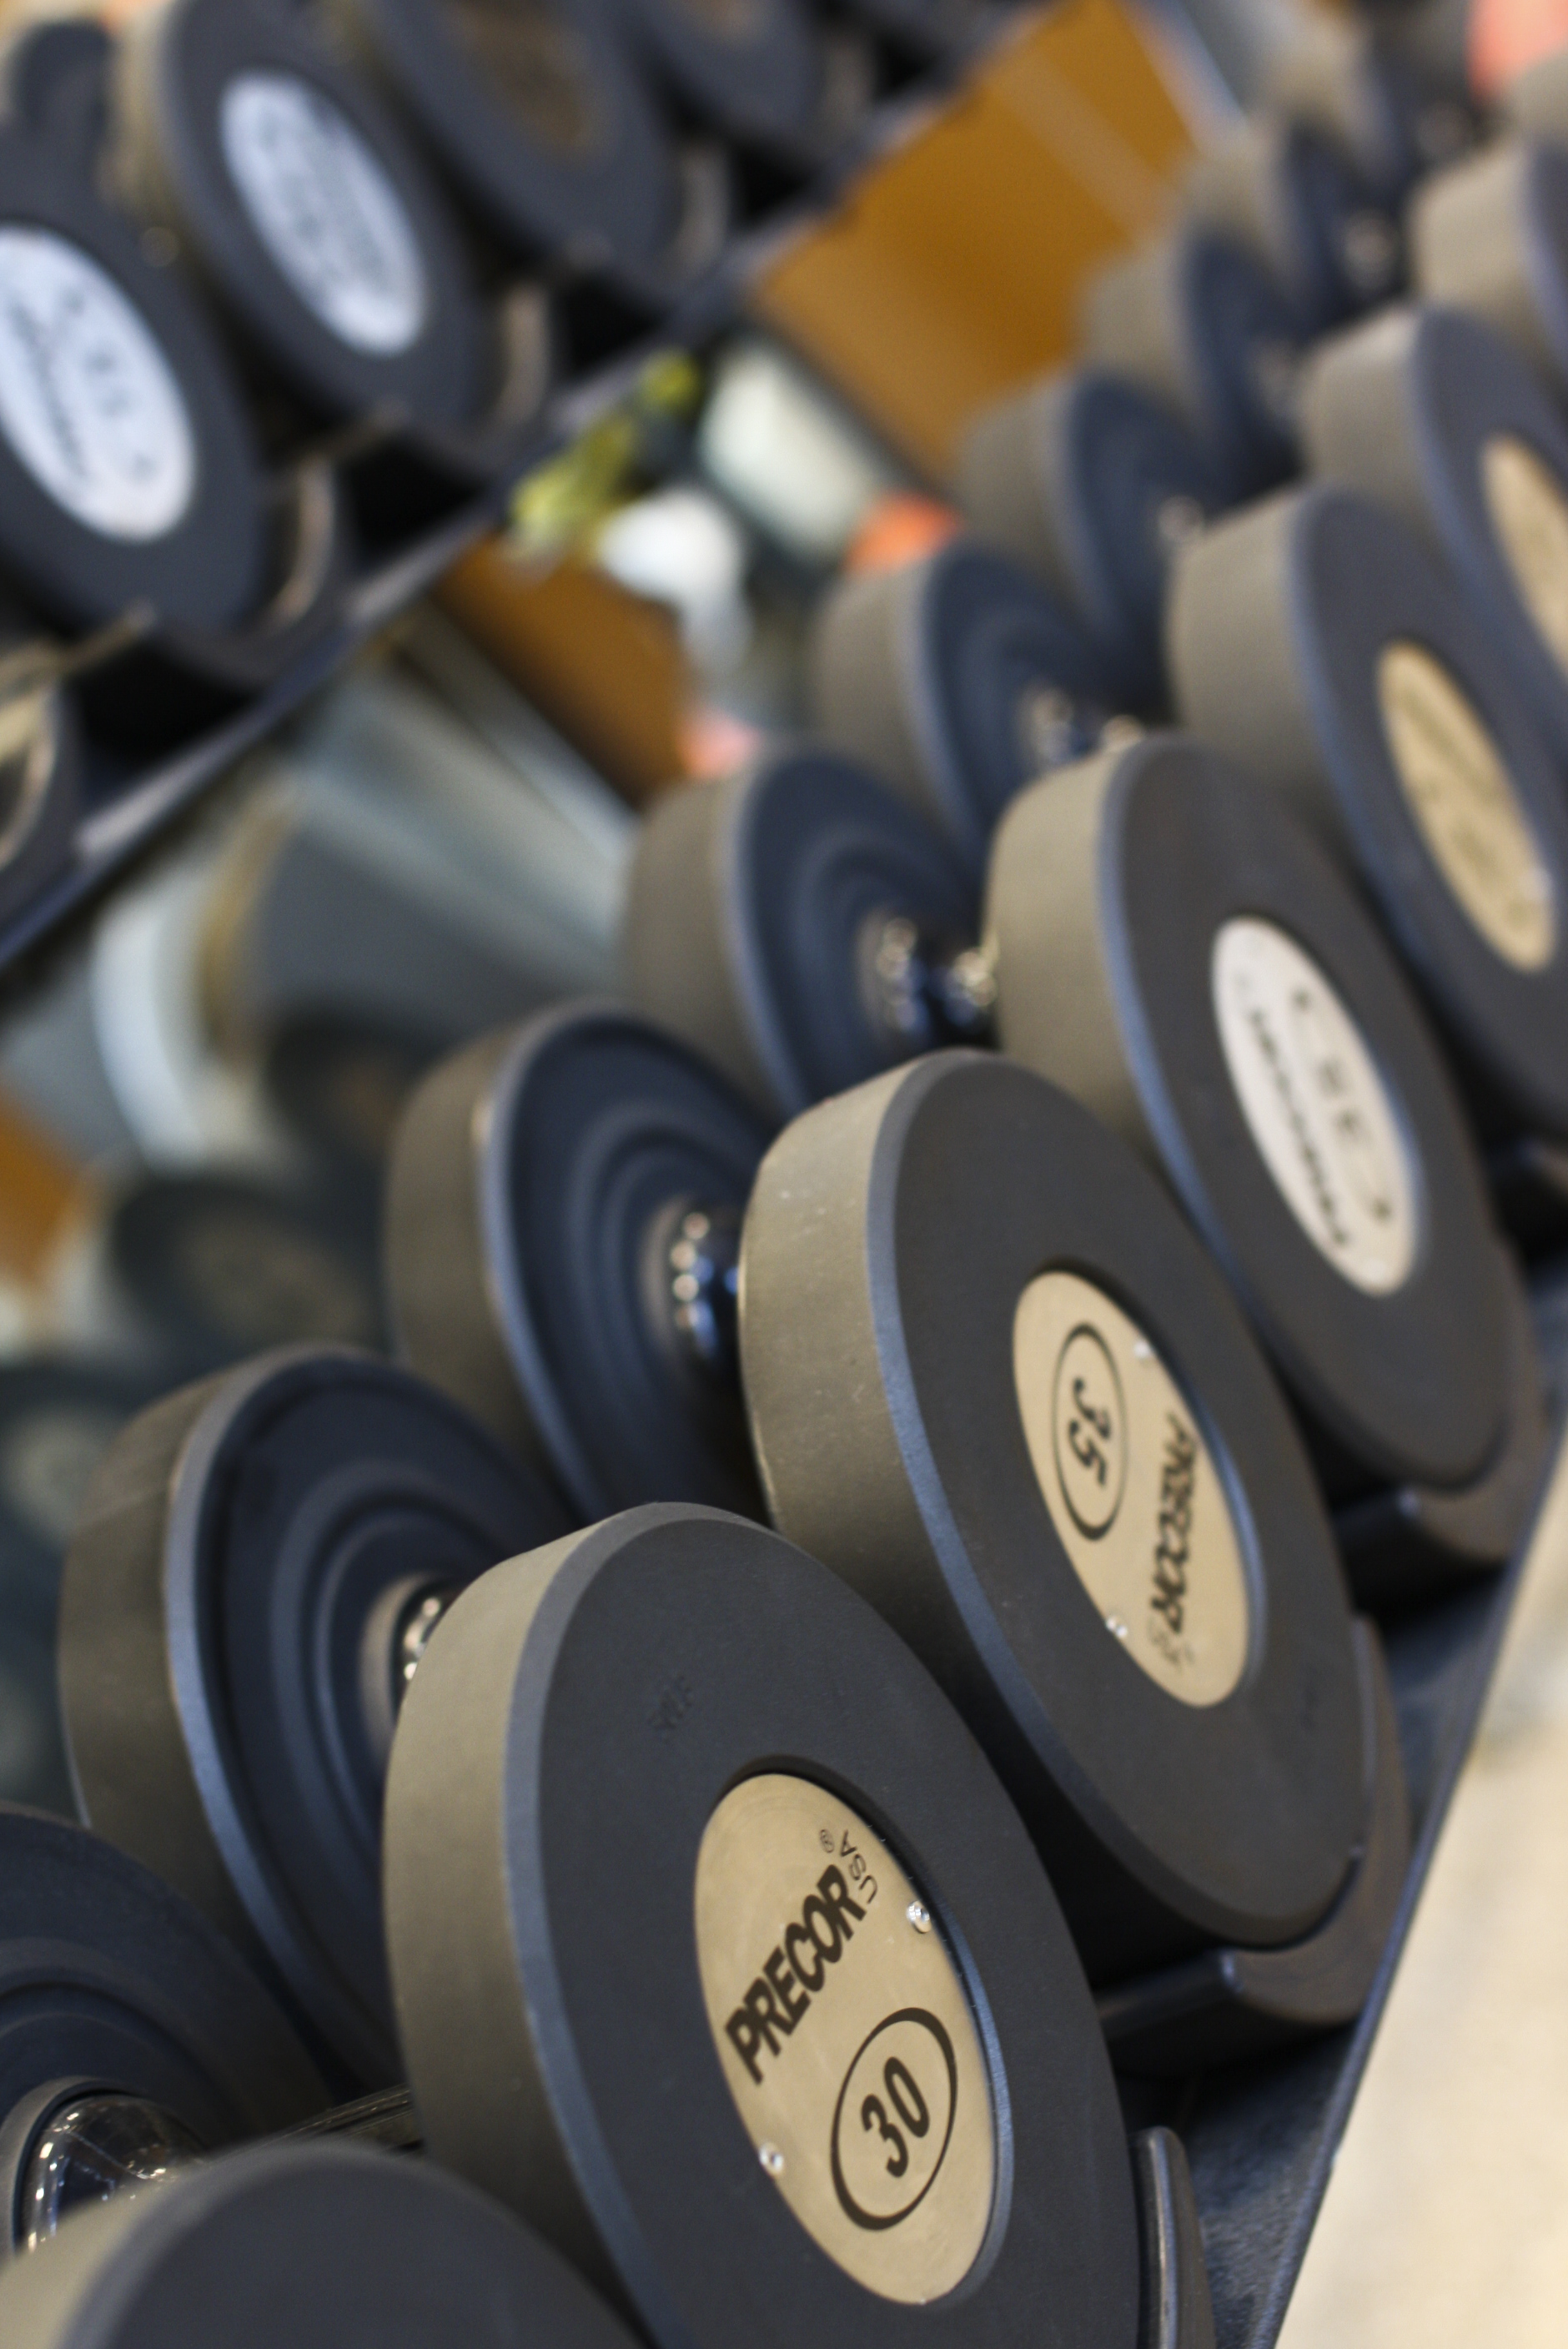 Fitness Room Weights